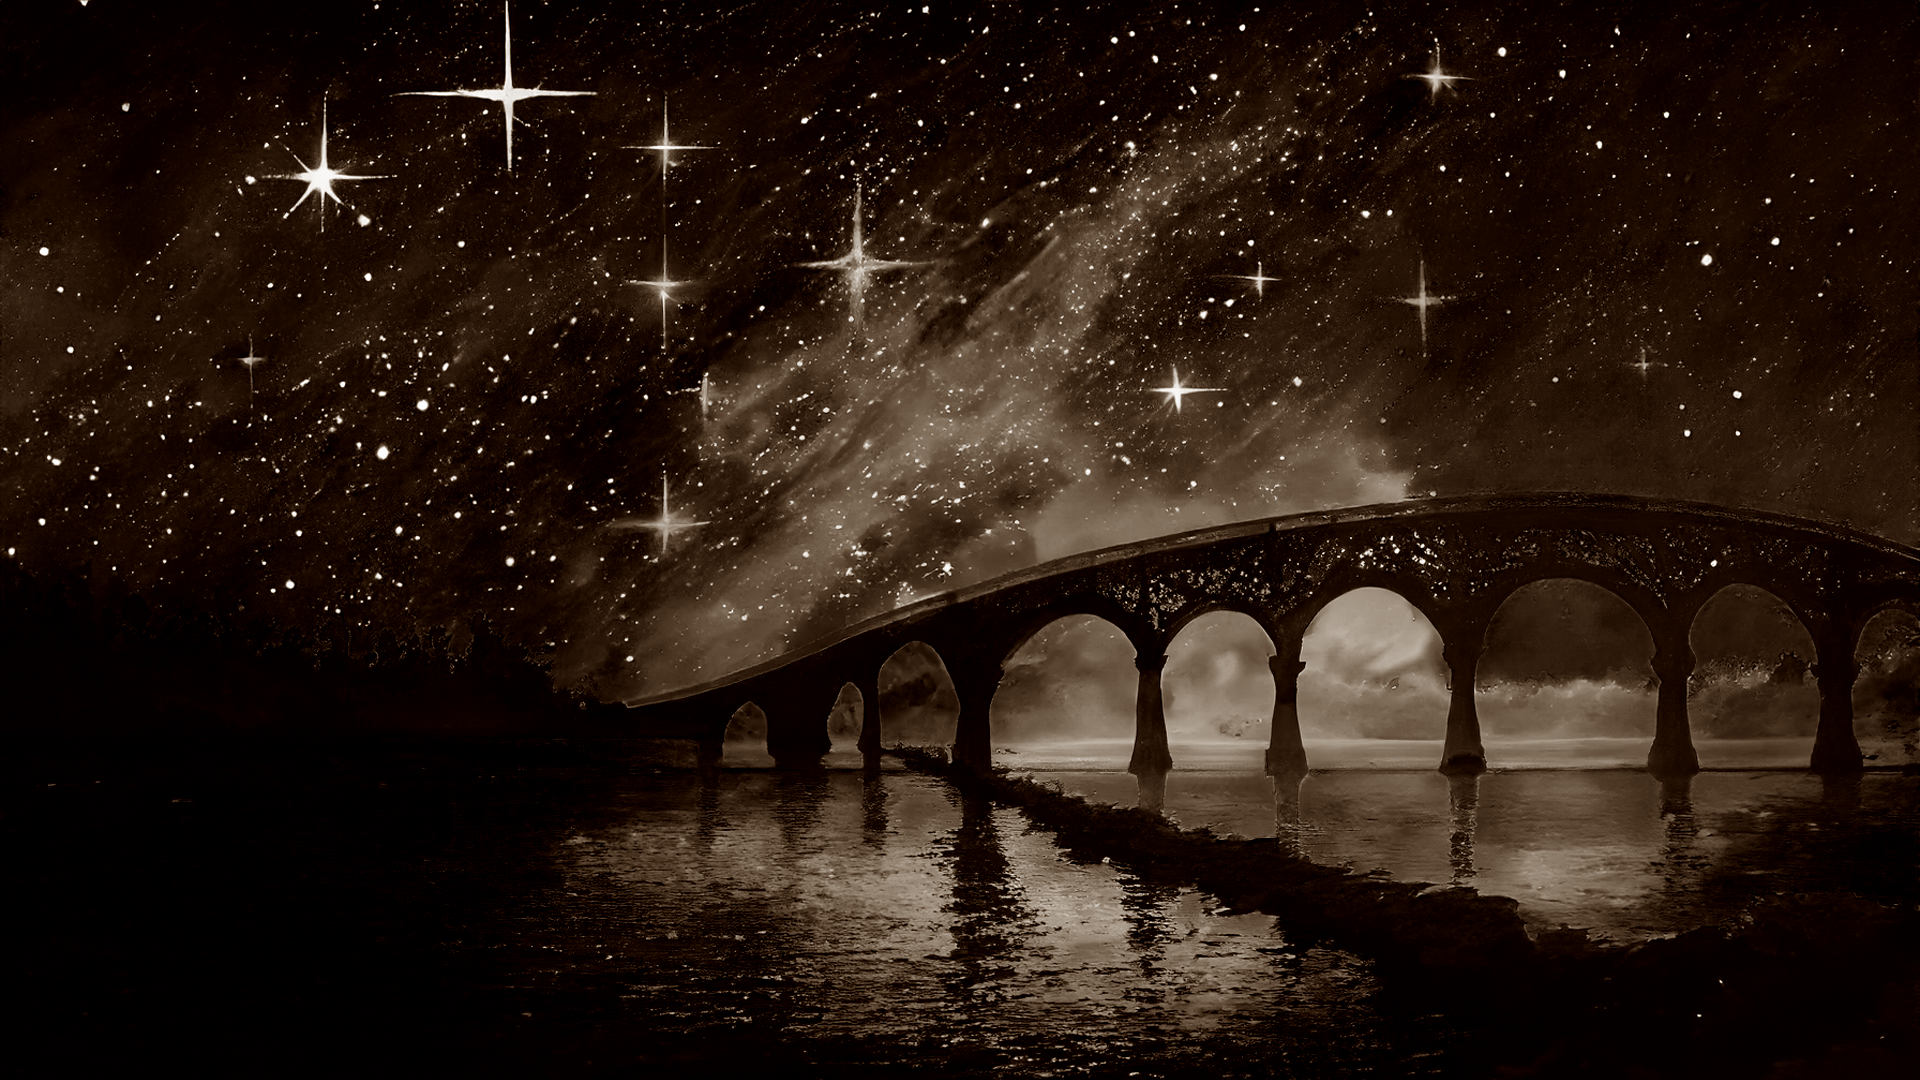 'Starlit Bridge' was generated by Bard (now Gemini). The link leads to a blog post containing a collection of holiday-themed stories also by, and about, Bard.